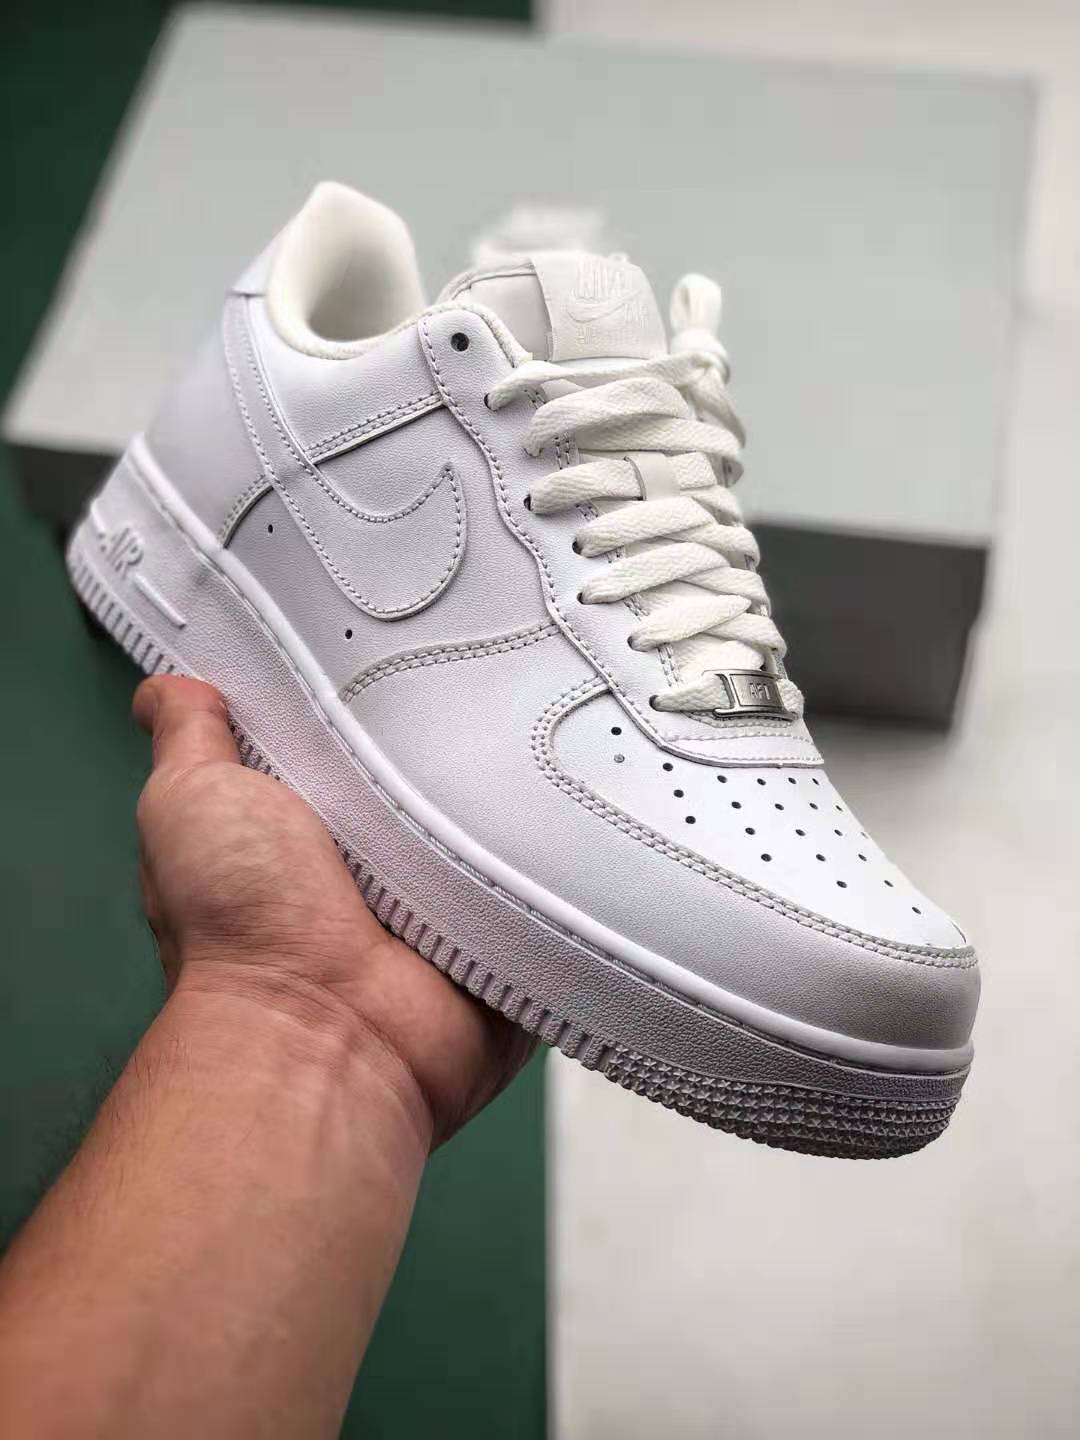 Nike Air Force 1 '07 'White' 315122-111 - Classic Sneaker with Timeless Style